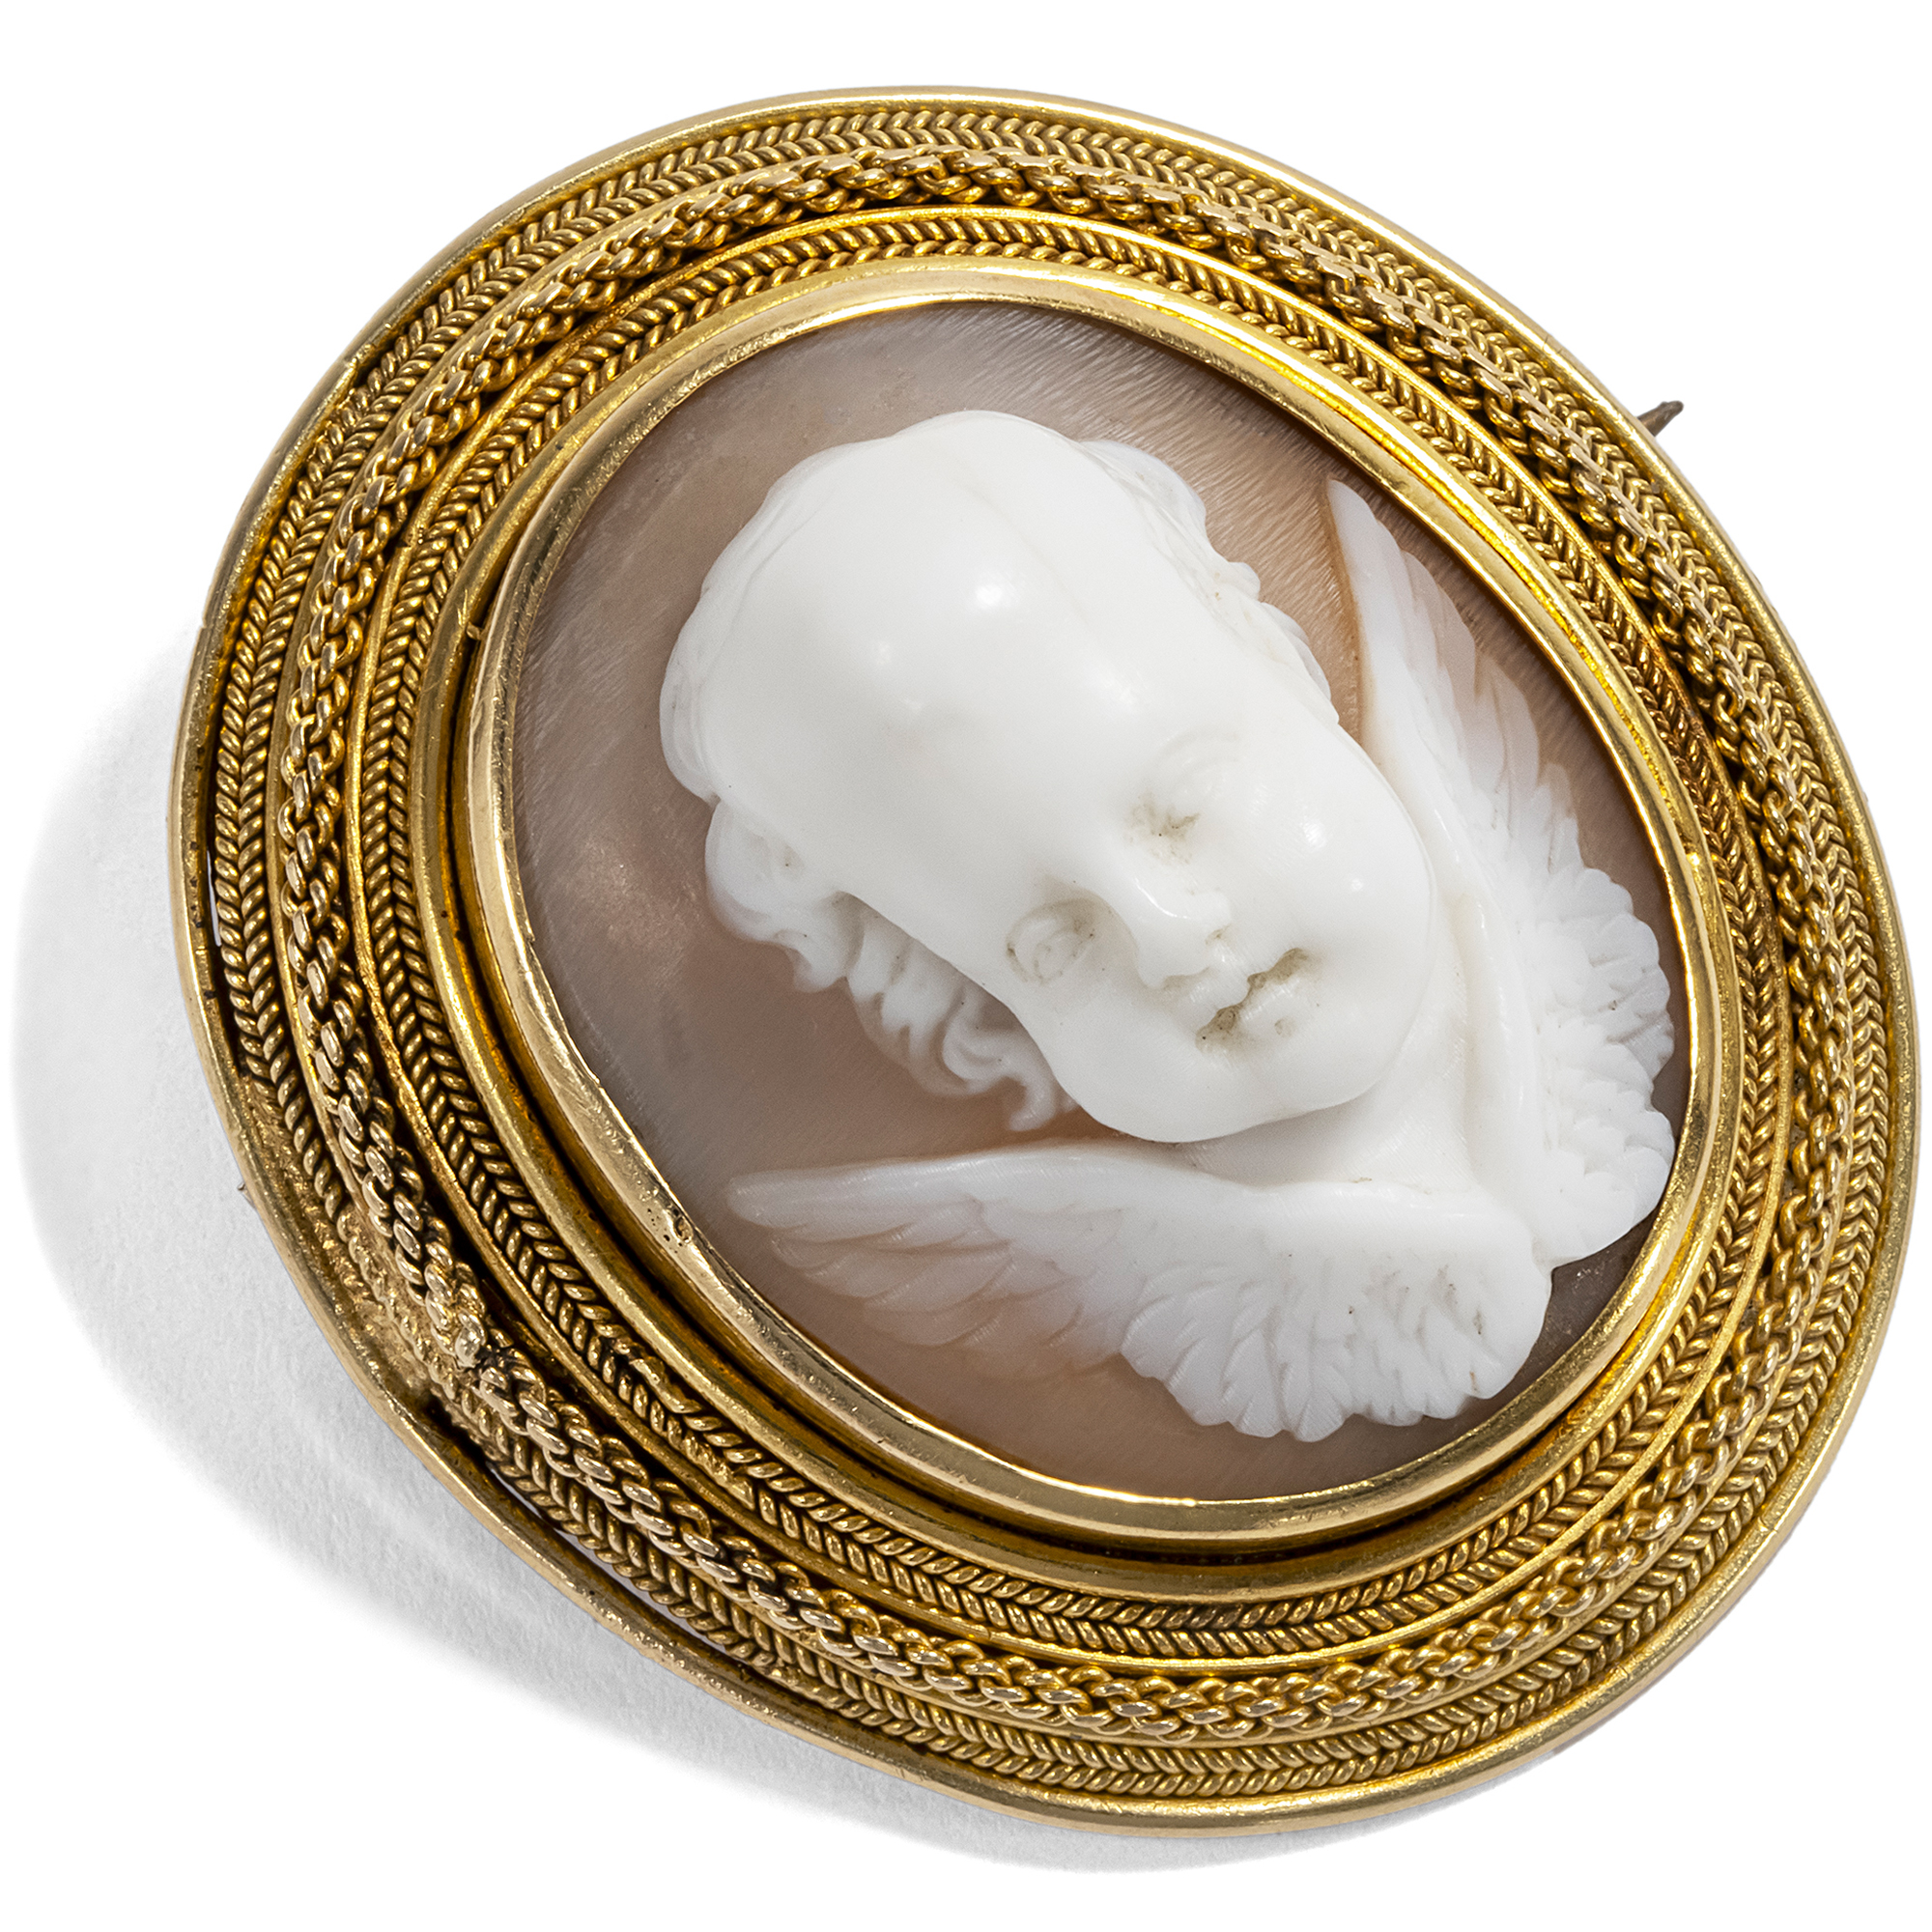 Antique Gold Brooch with Lovely Cameo, Italy ca. 1870